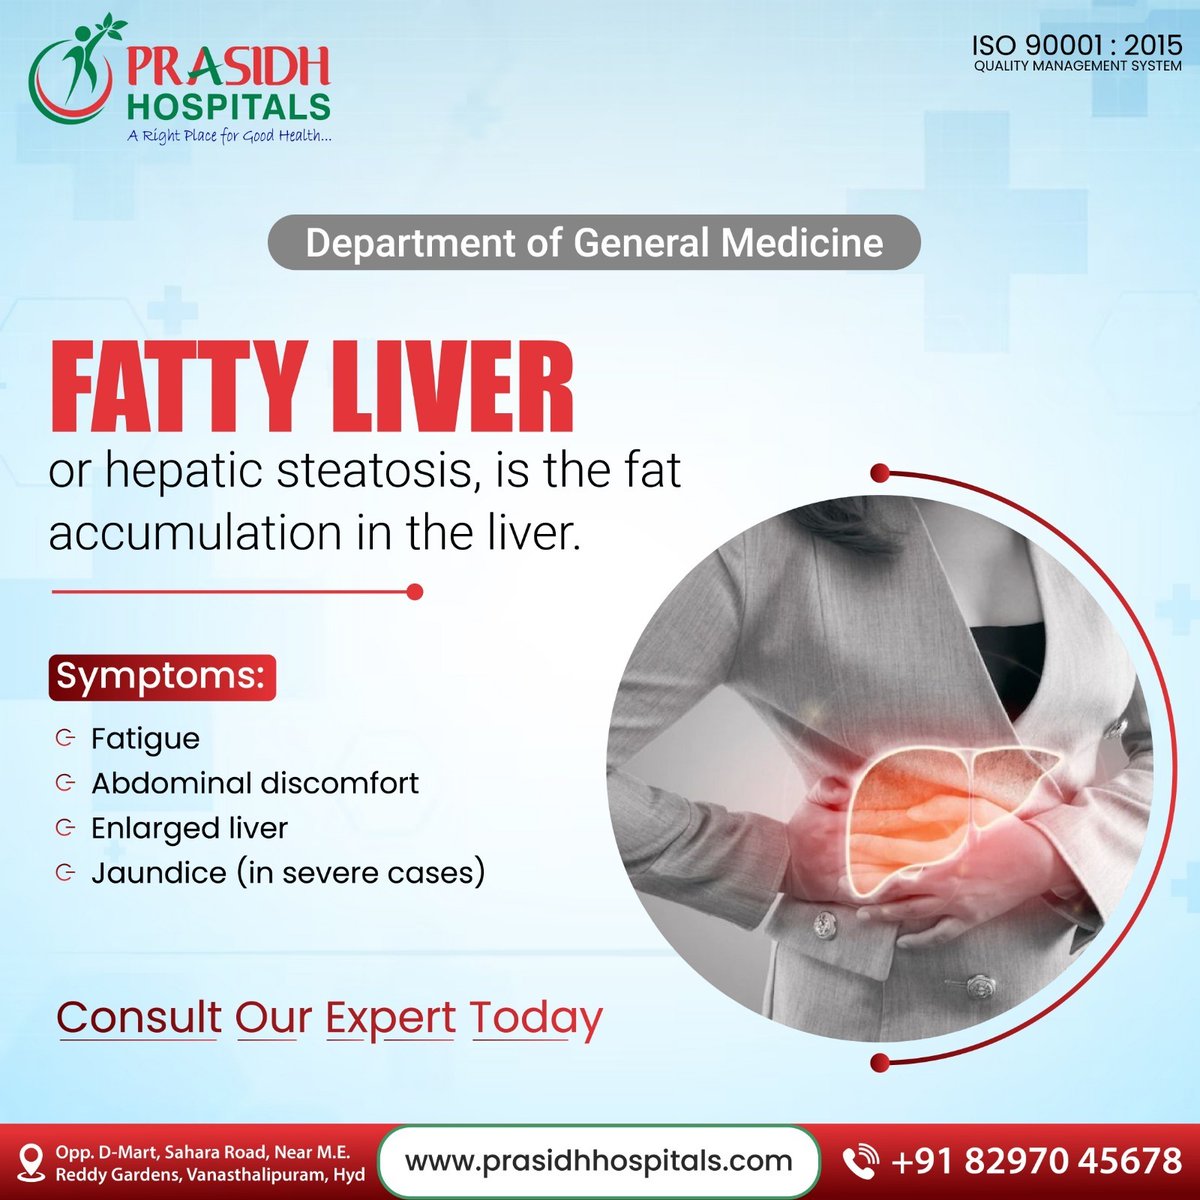 Fatty liver, or hepatic steatosis, is when excess fat accumulates in your liver. It can lead to fatigue, abdominal pain, and jaundice. If left untreated, it can progress to liver inflammation and scarring, called cirrhosis, which can be life-threatening. 

#generalmedicine